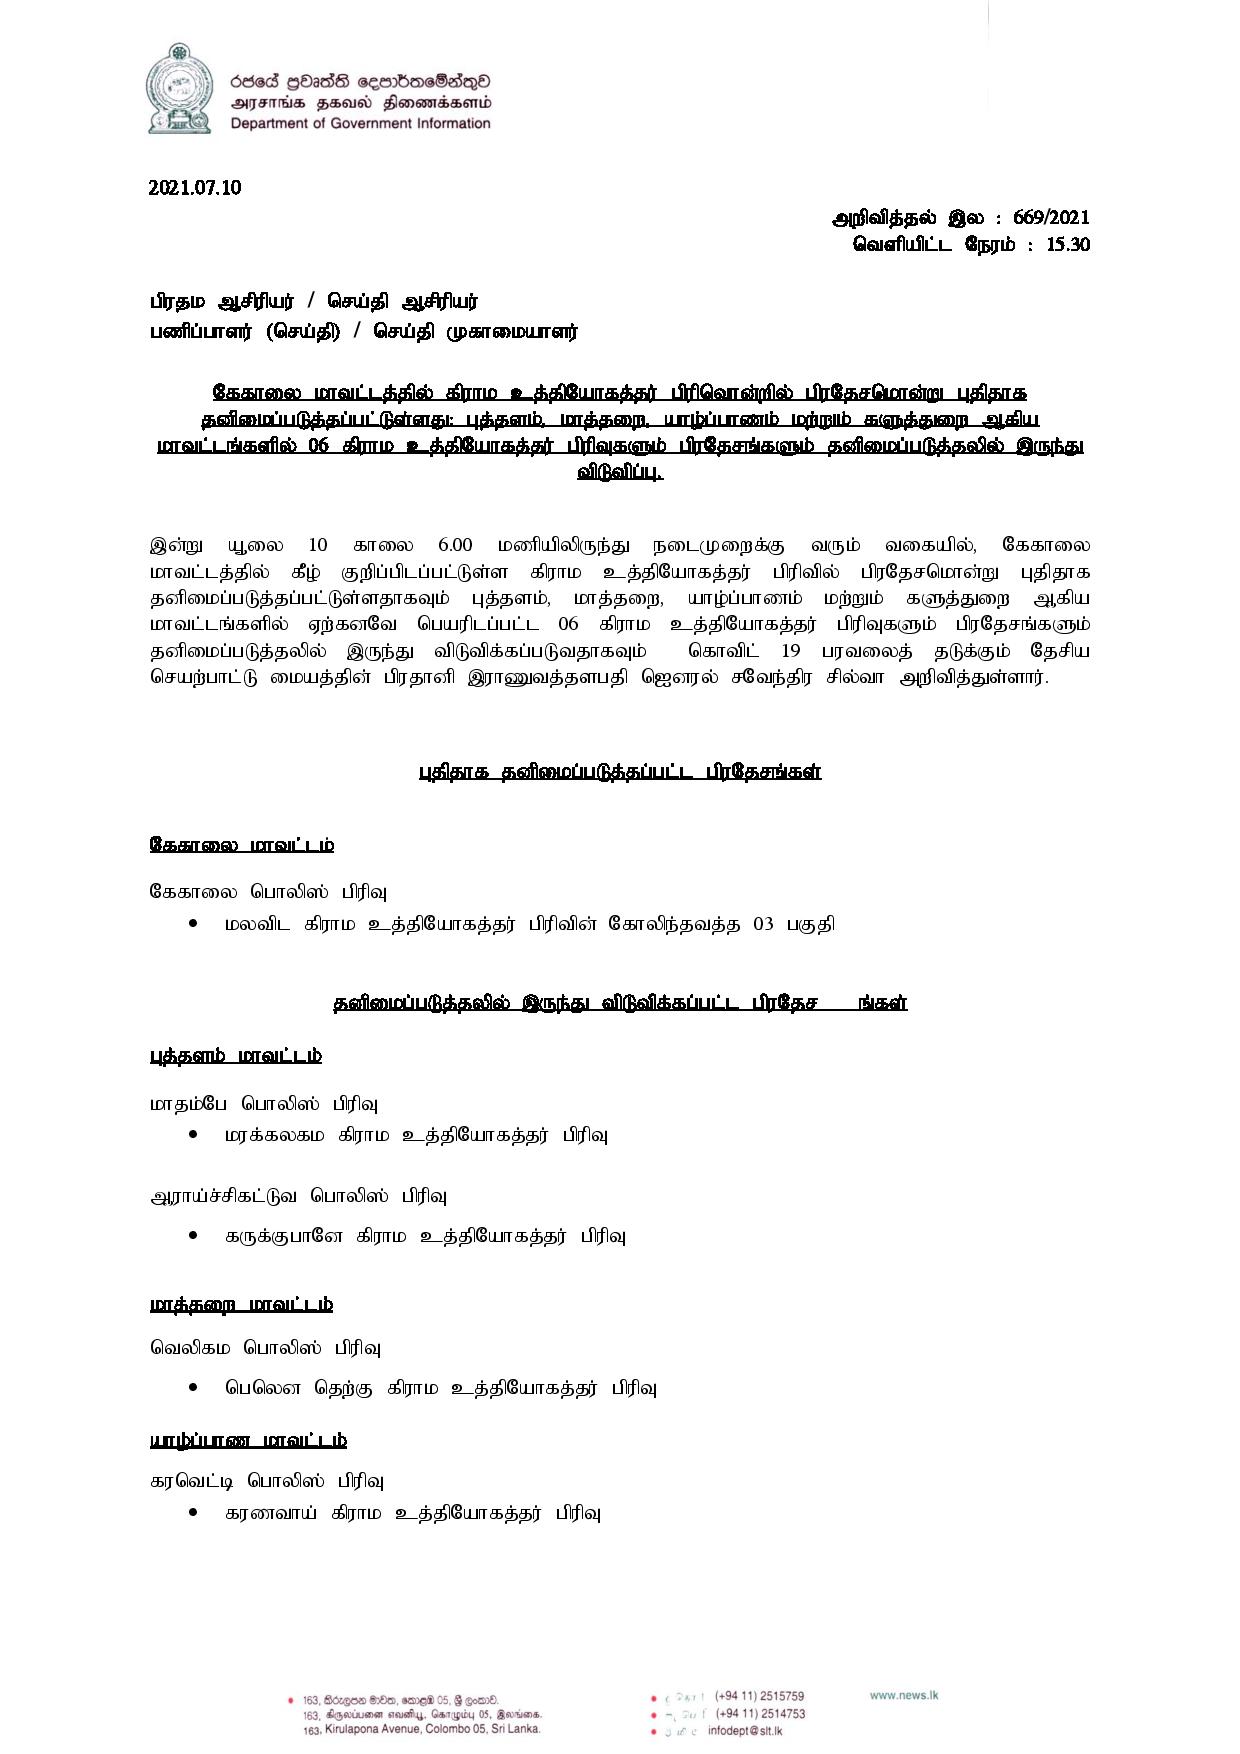 Press Release 669 Tamil page 001